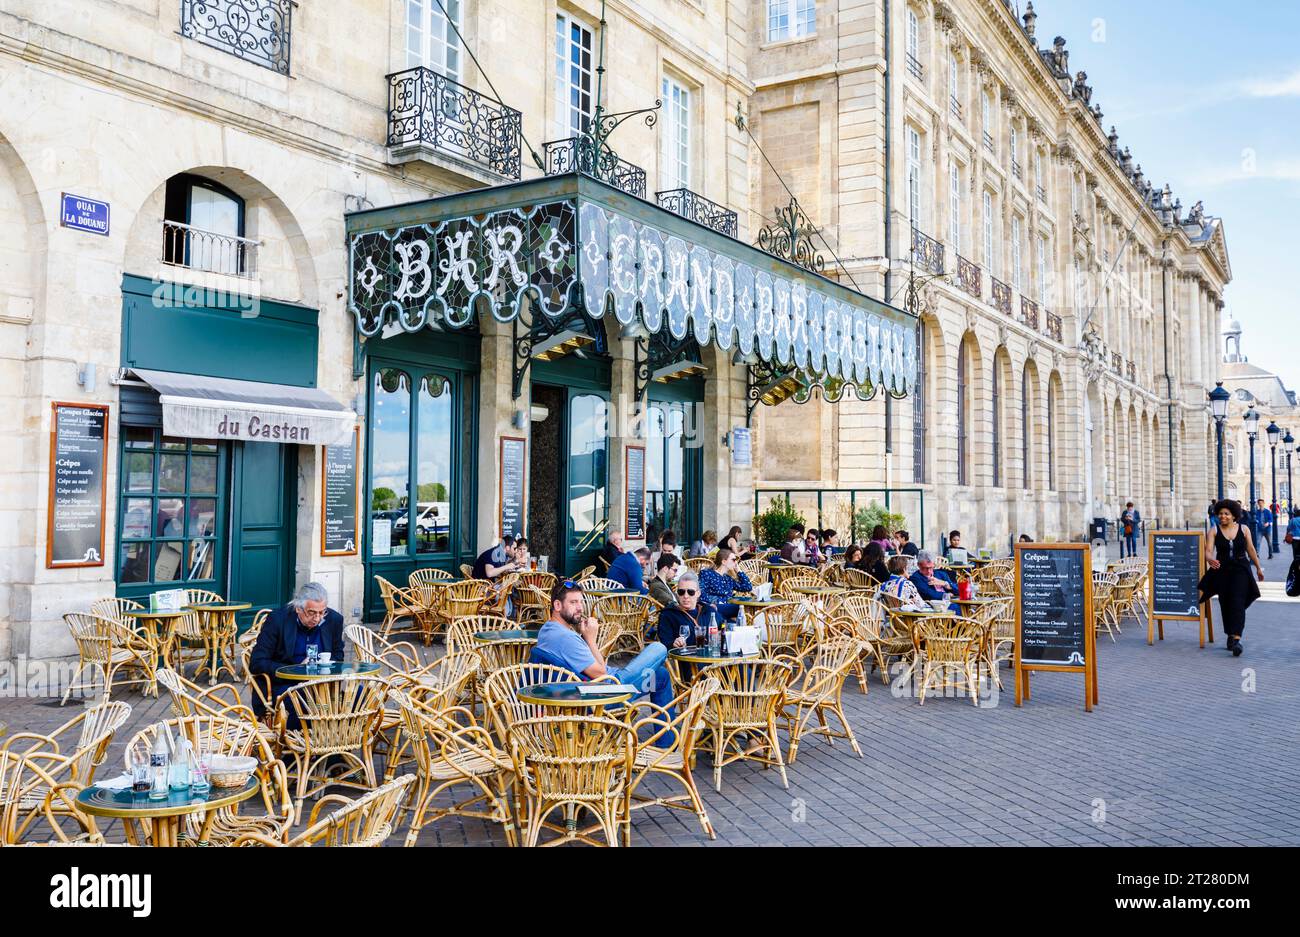 Outdoor dining outside the riverside Grand Bar Castan, one of the oldest cafes  in Bordeaux, a port city on the Garonne River in southwestern France Stock Photo